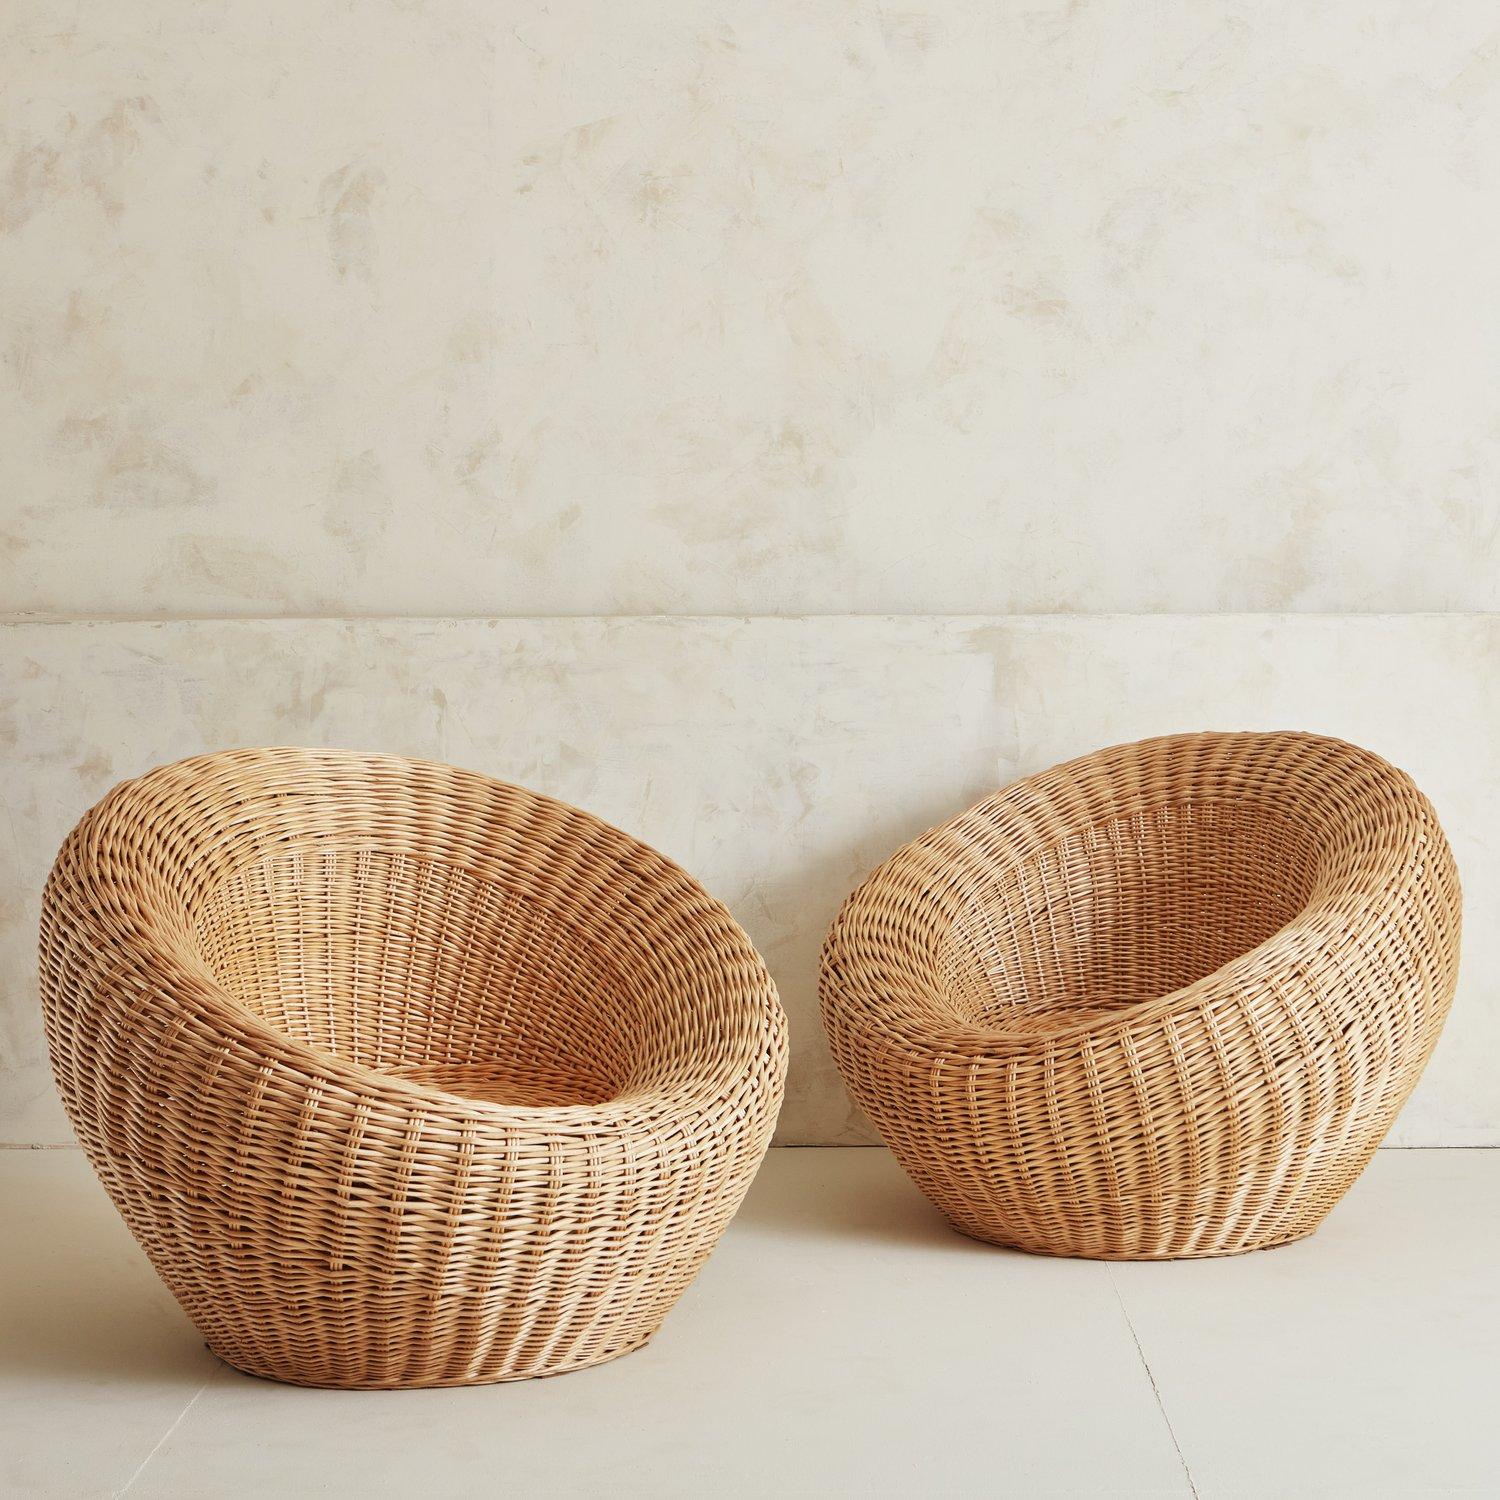 A gorgeous pair of rounded wicker lounge chairs in the style of Japanese modernist designer Isamu Kenmochi. These organic chairs are sculptural and elegant, featuring tightly woven rattan in a beautiful blonde hue. Sourced in Spain, 1970s.